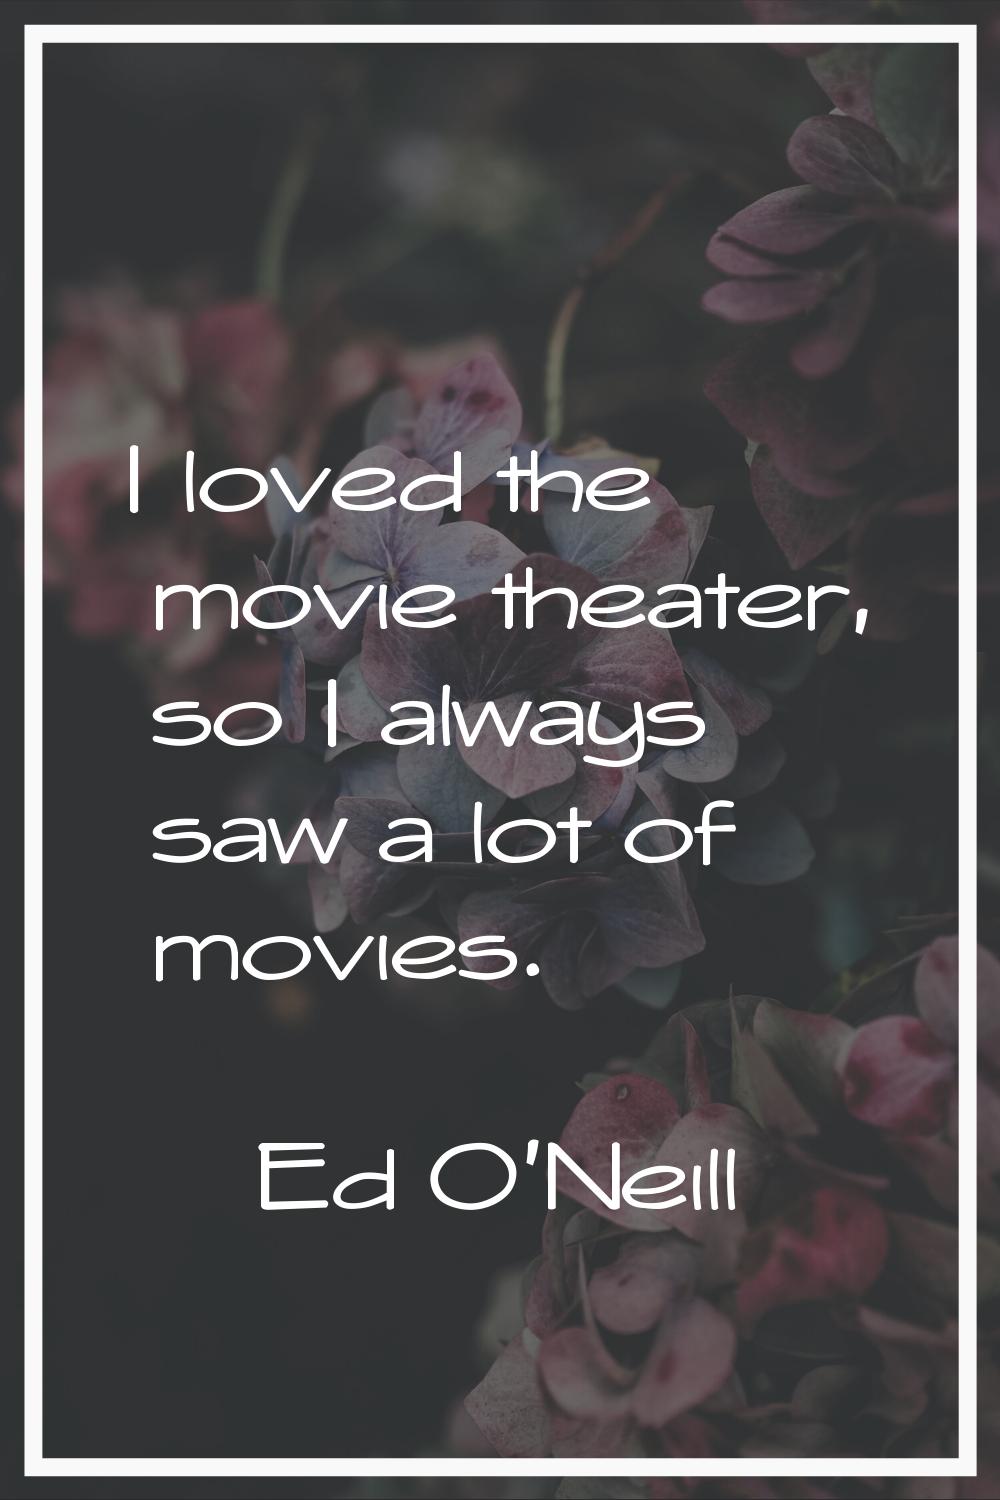 I loved the movie theater, so I always saw a lot of movies.